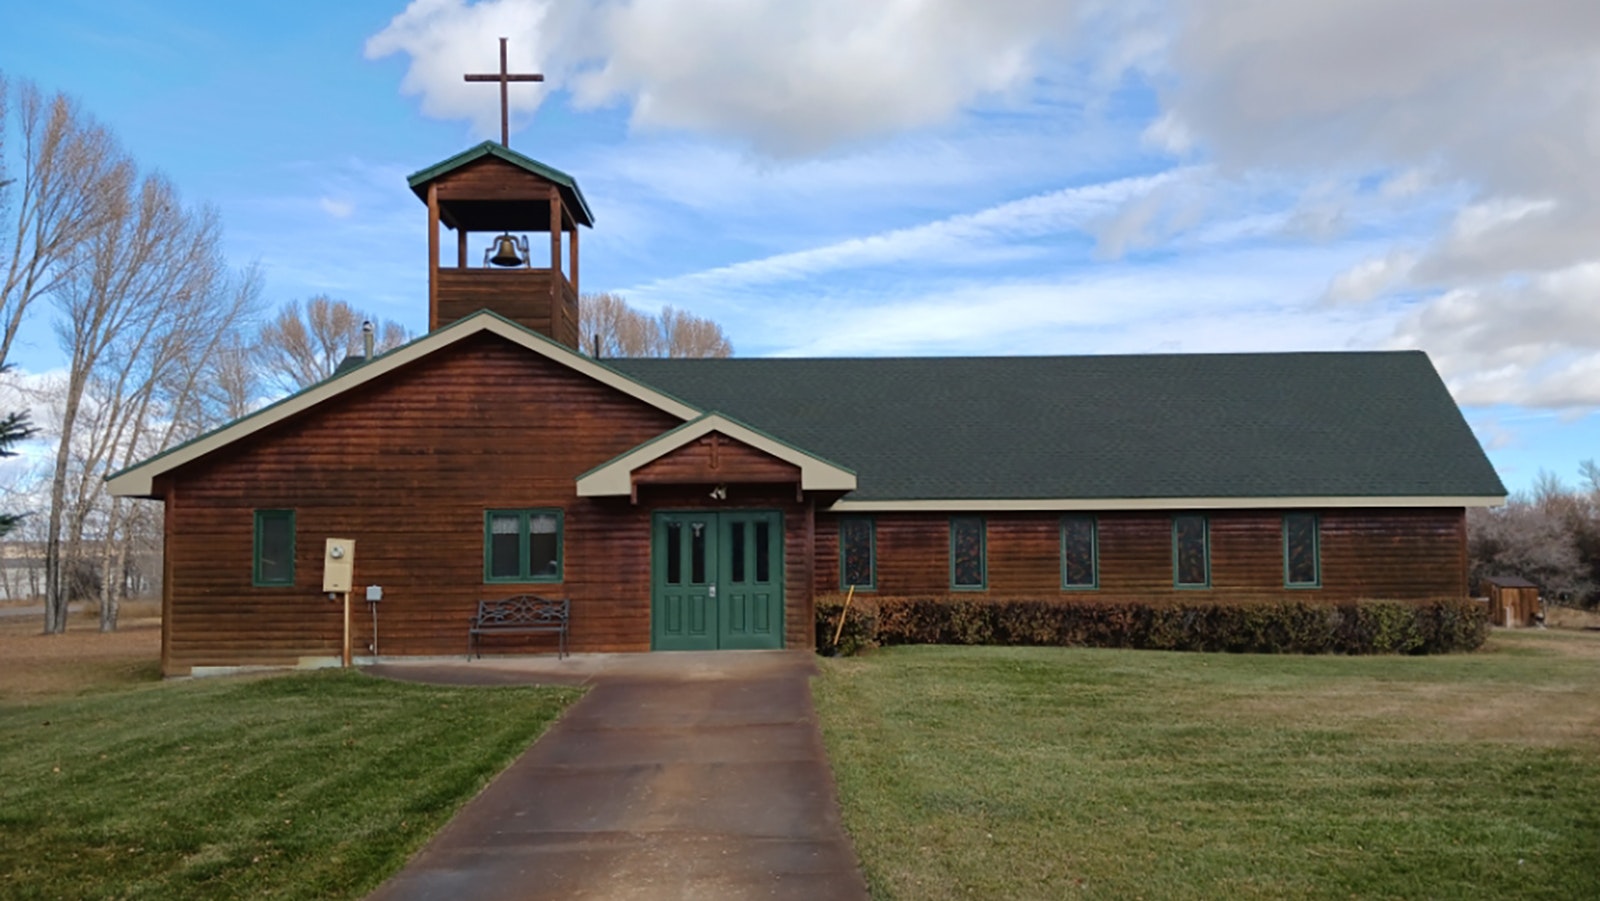 Shepherd of the Valley Lutheran Church in Fort Bridger is the small church pastored by Dan Mulholland.